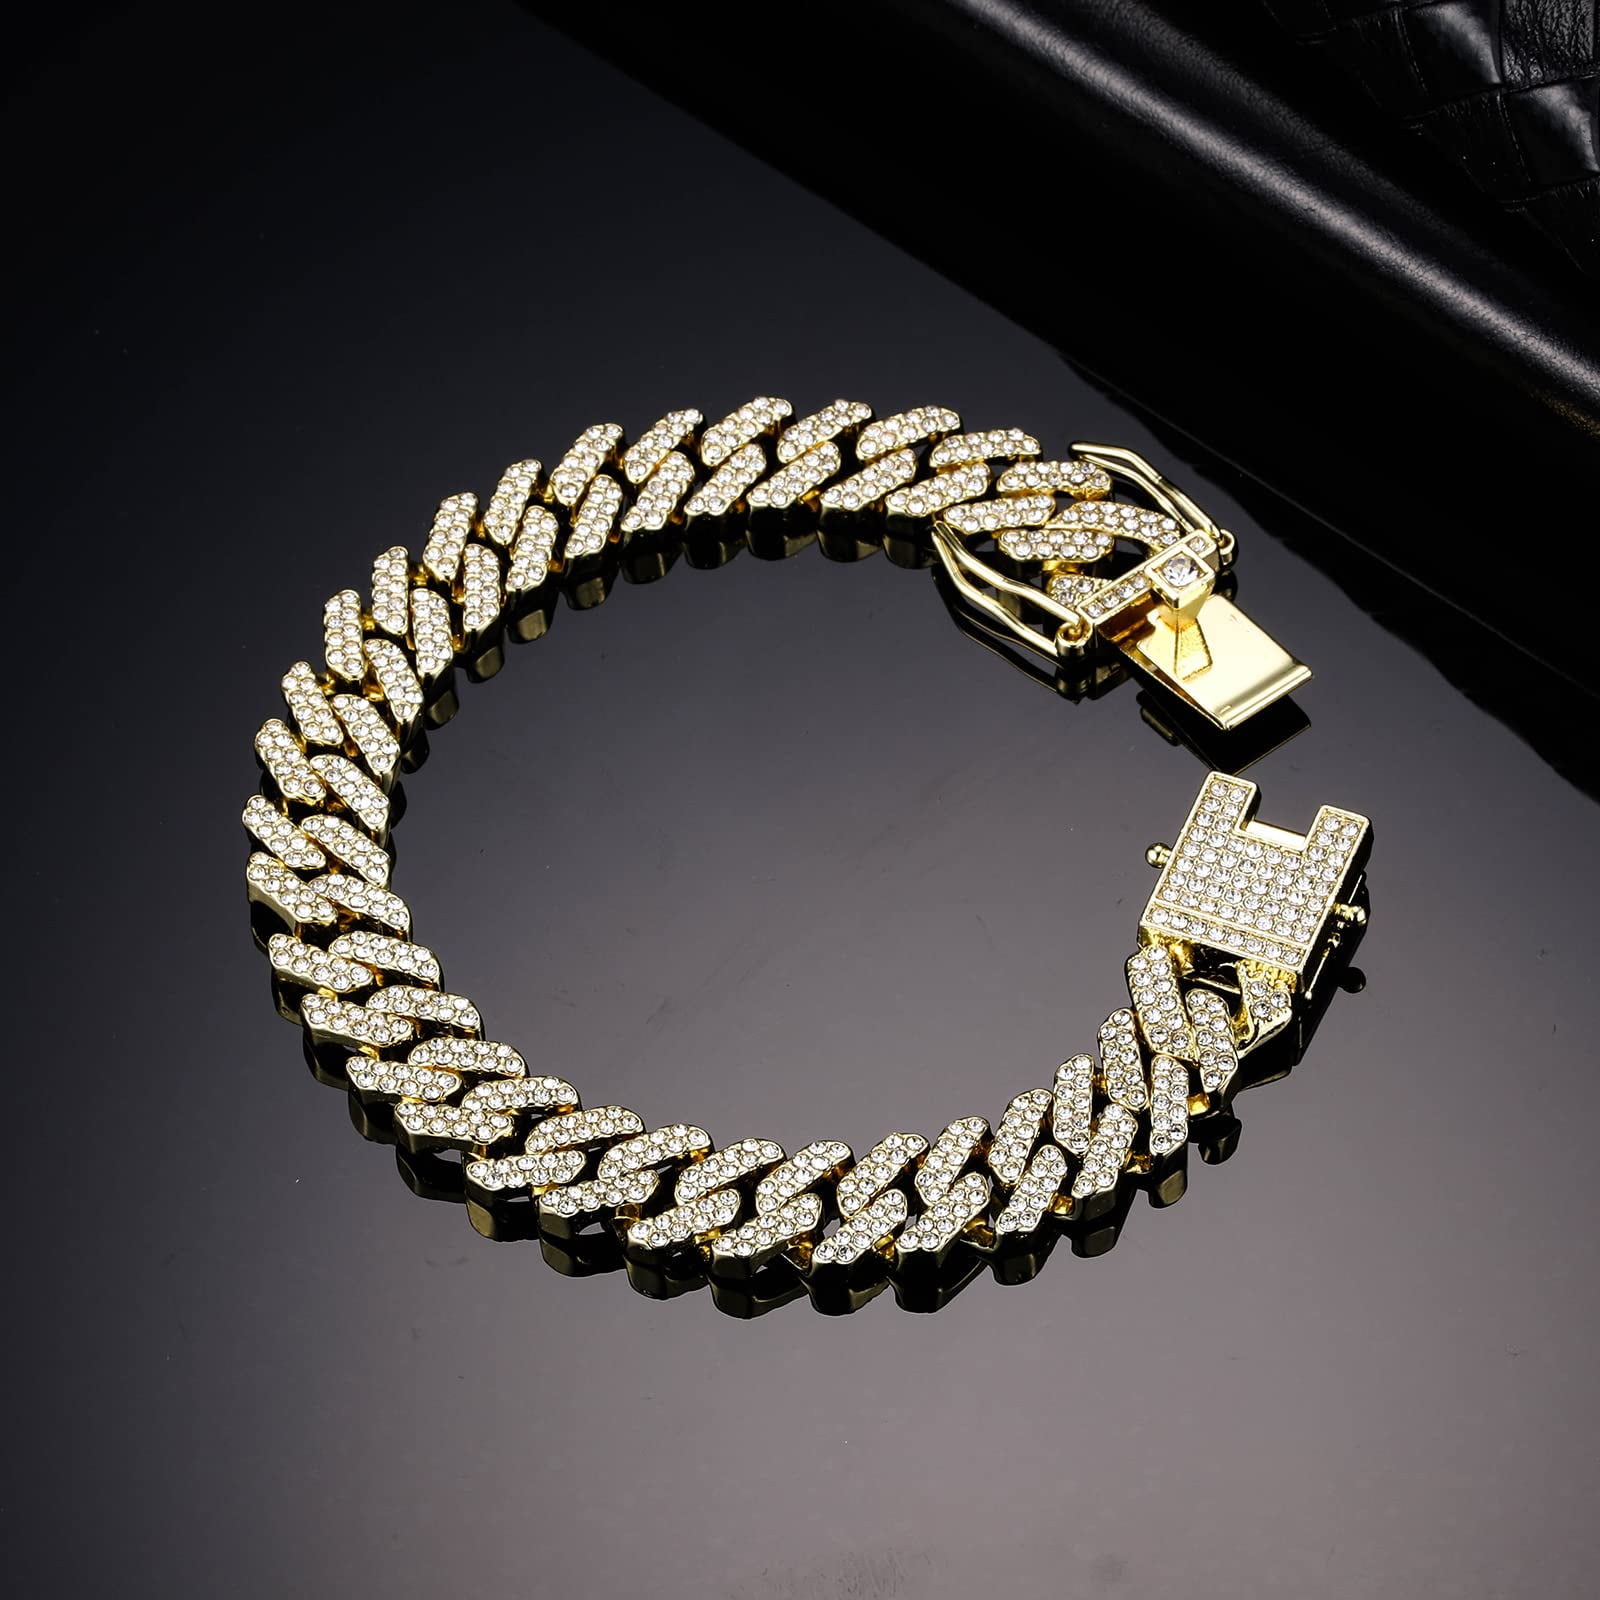 Buy VIEN Iced Out Cuban Link Bracelet Bling Zirconia Miami Link Bangle  Jewelry for Men Women Hip Hop Bracelets Jewelry (SILVER) at Amazon.in